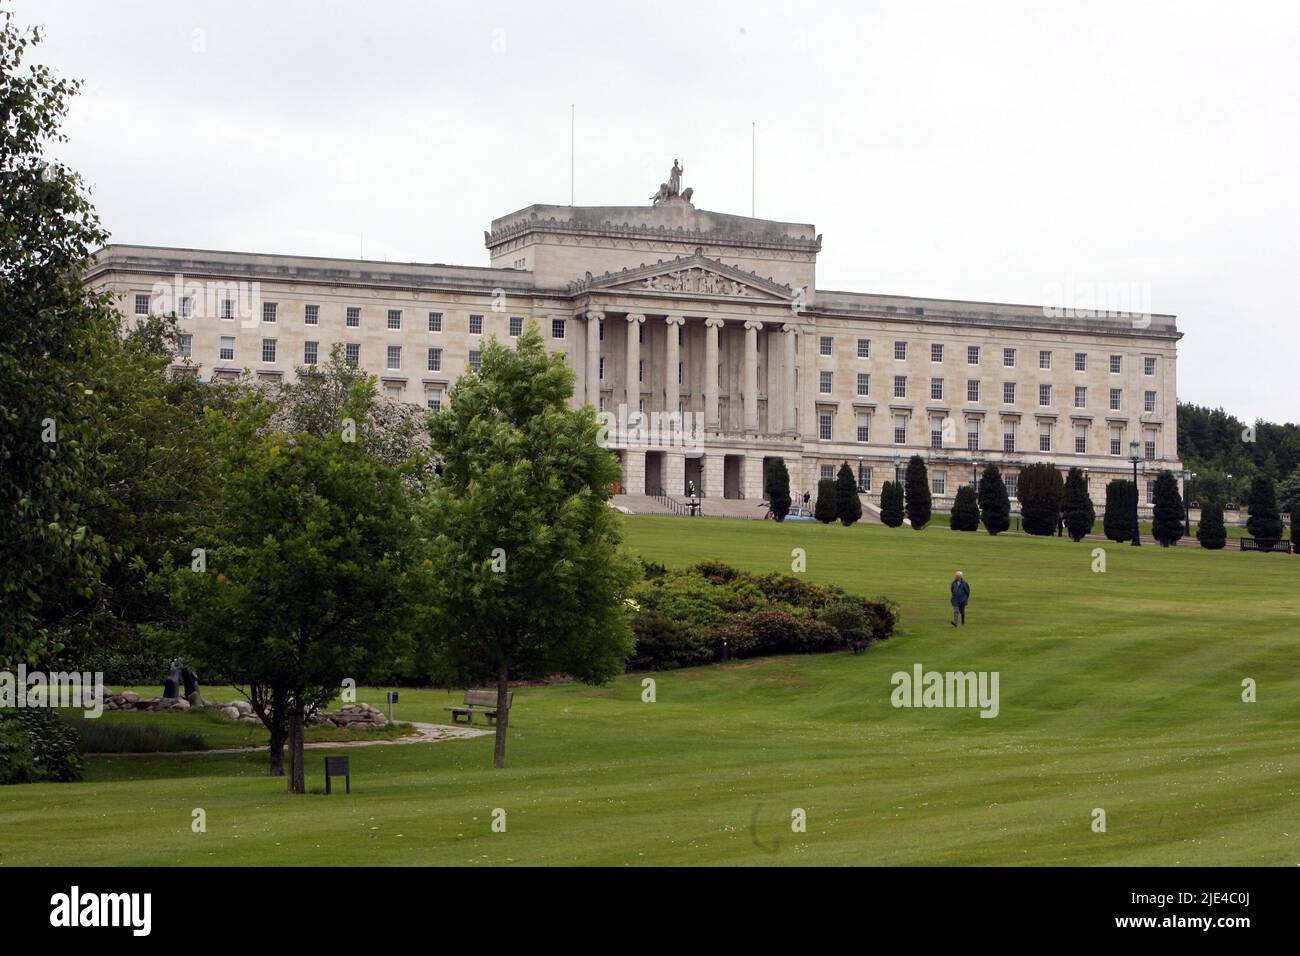 File photo dated 28/06/07 of Parliament Buildings at Stormont, Belfast, as a cost-of-living protest is due to take place at Stormont on Saturday over 'spiralling costs' in Northern Ireland, with a union umbrella group predicting an increase in pay claims being lodged over the coming weeks. Stock Photo